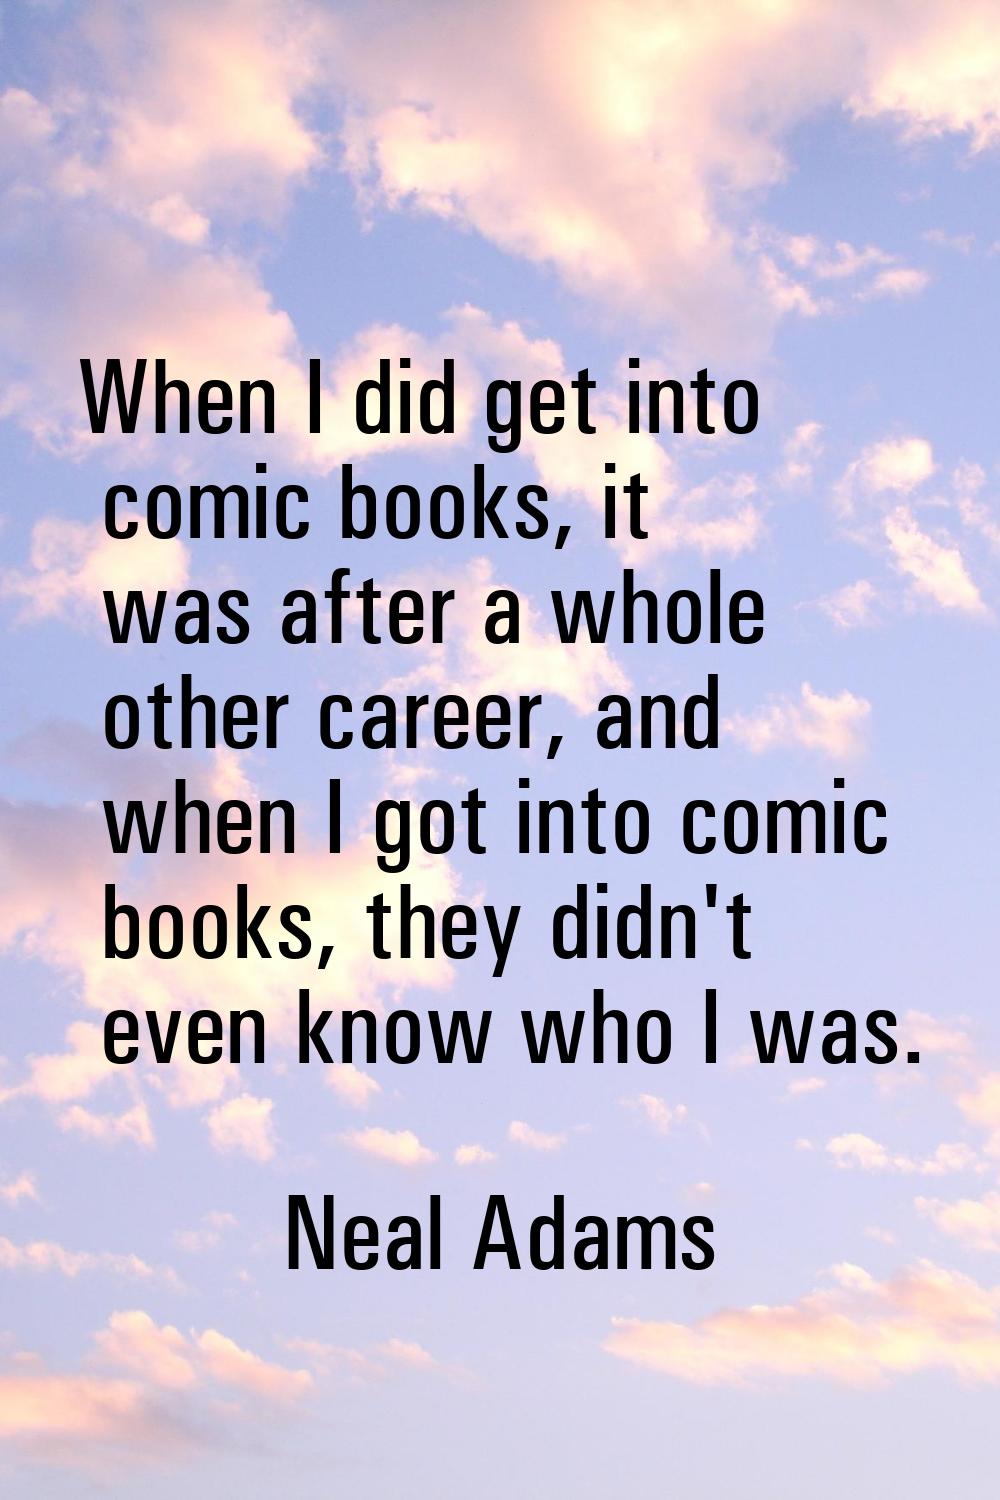 When I did get into comic books, it was after a whole other career, and when I got into comic books